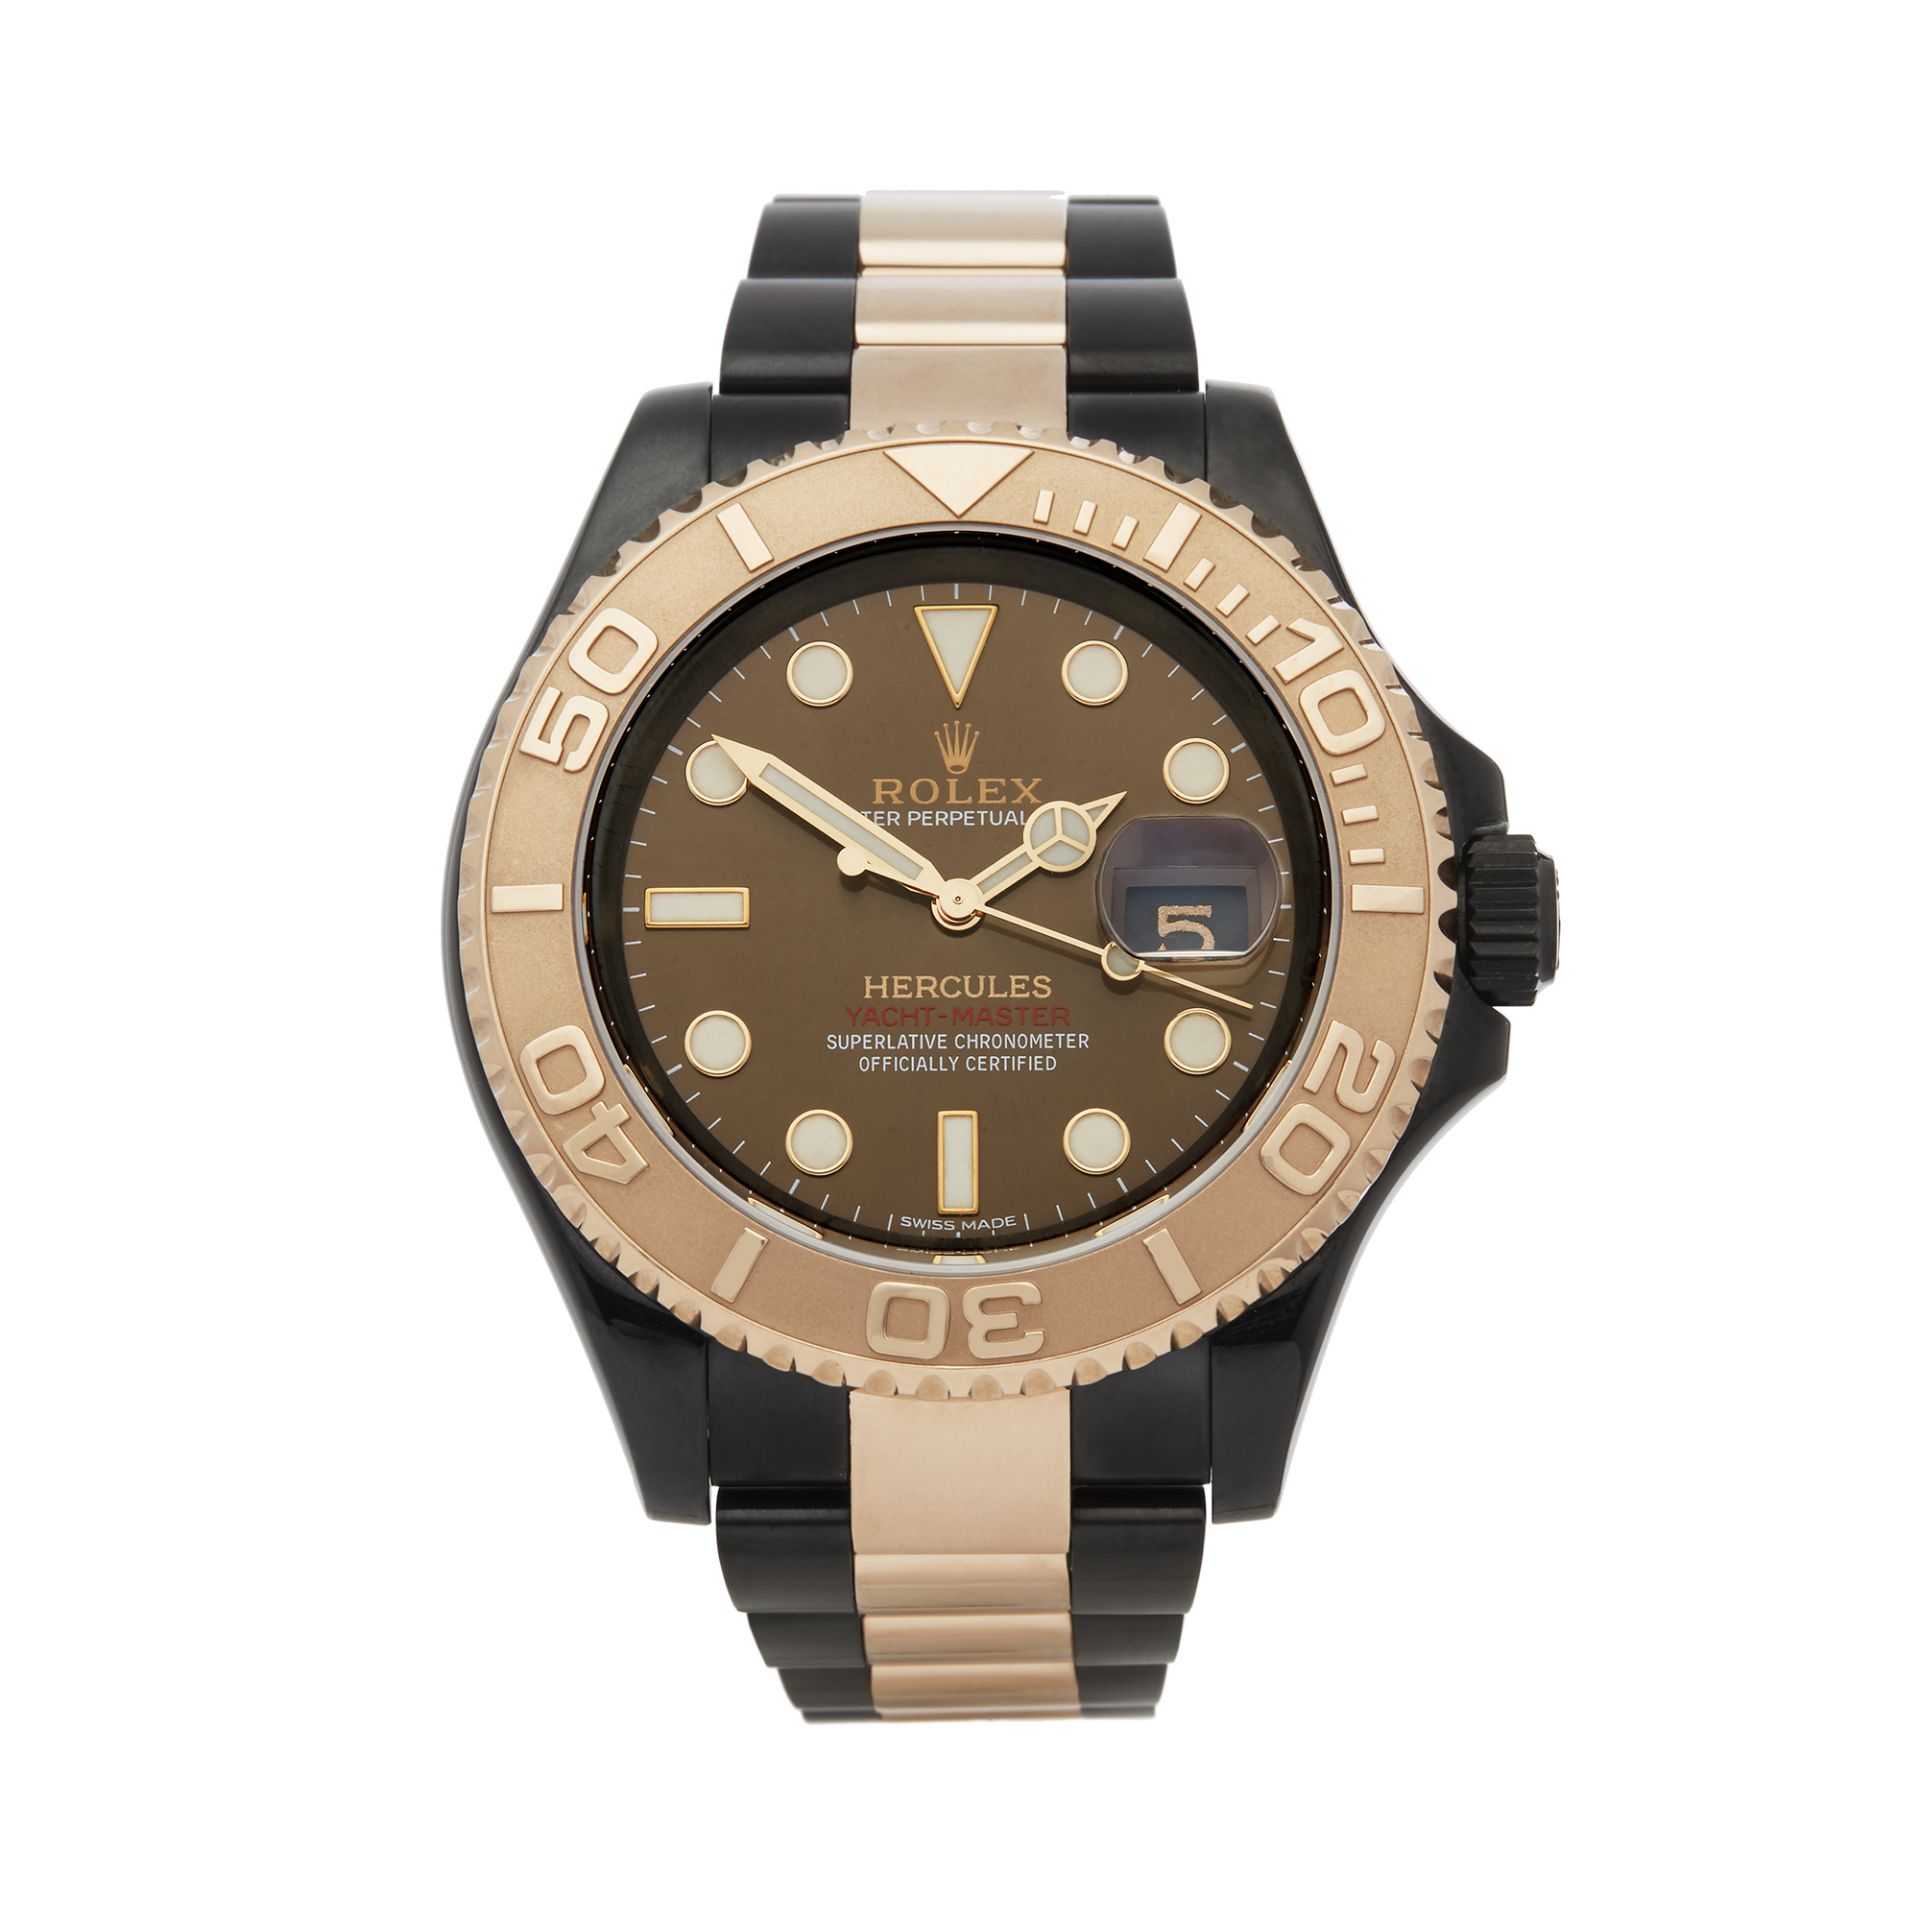 2016 Yacht-Master Hercules Dlc Coated Stainless Steel & 18K Rose Gold - 116621 - Image 5 of 8